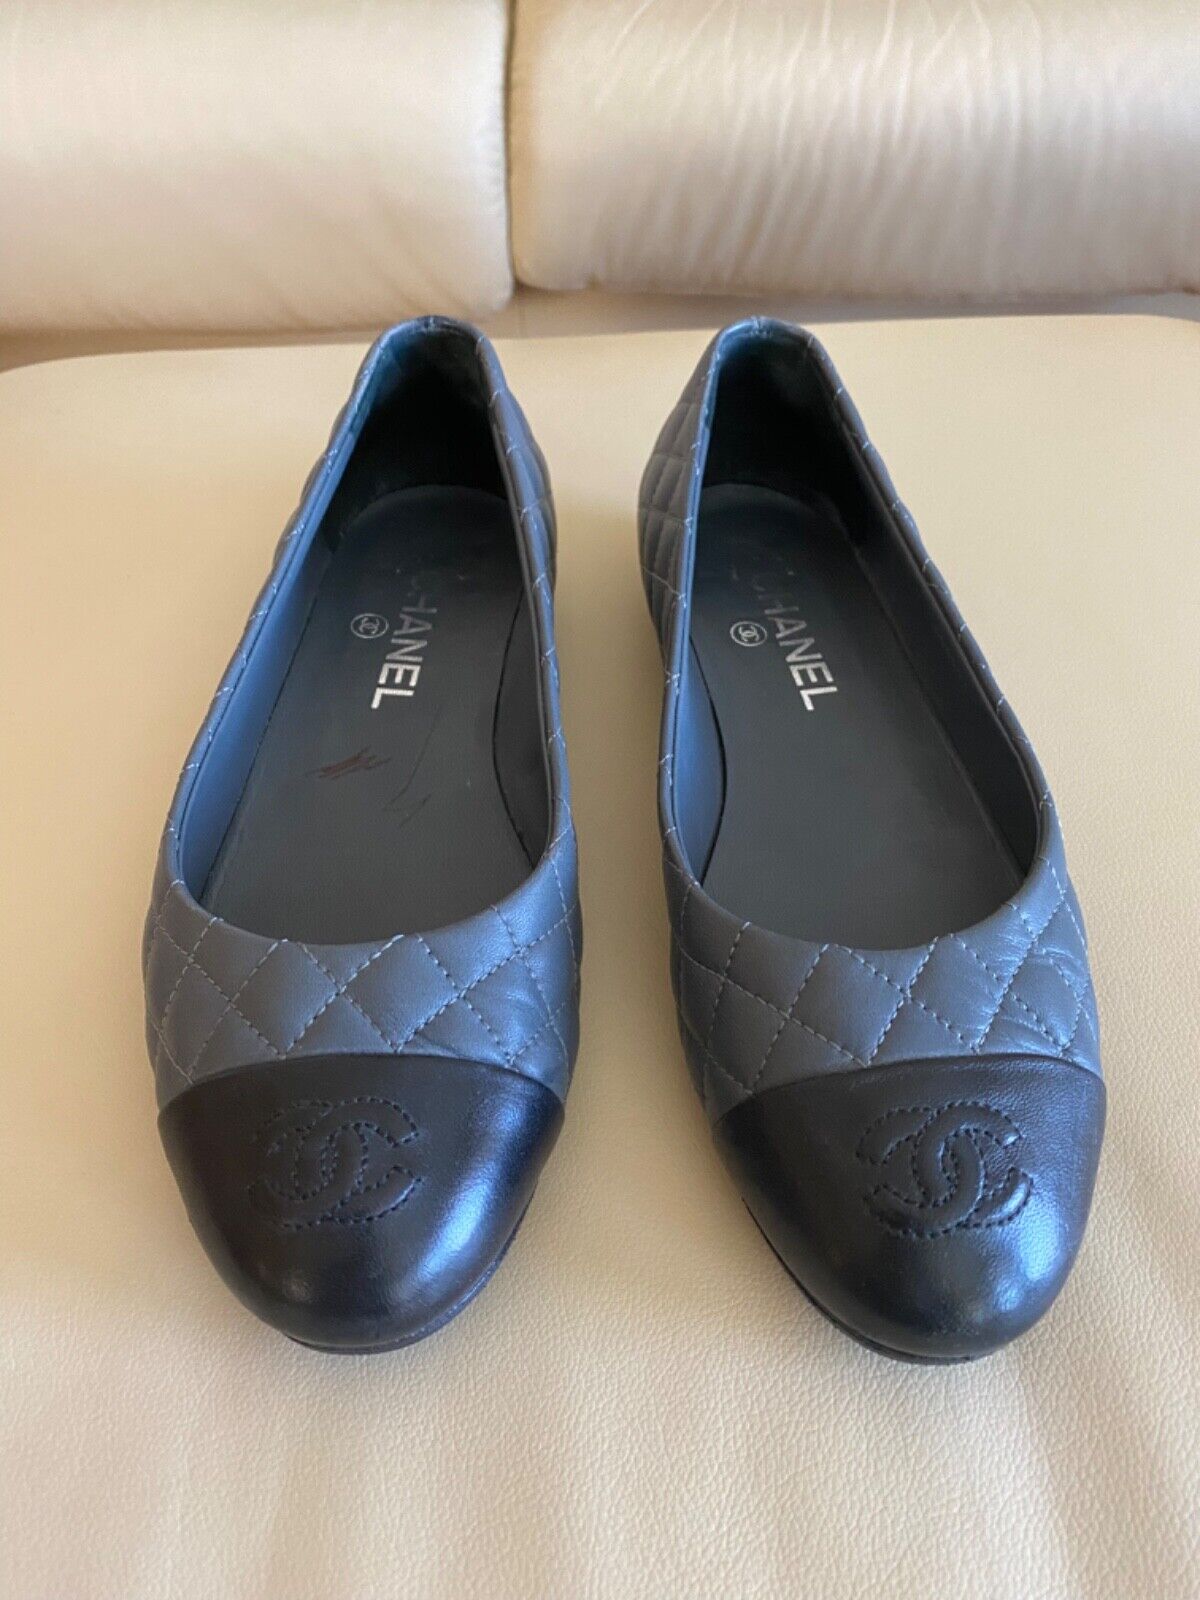 Chanel quilted leather women's flat shoes EU 38 1/2